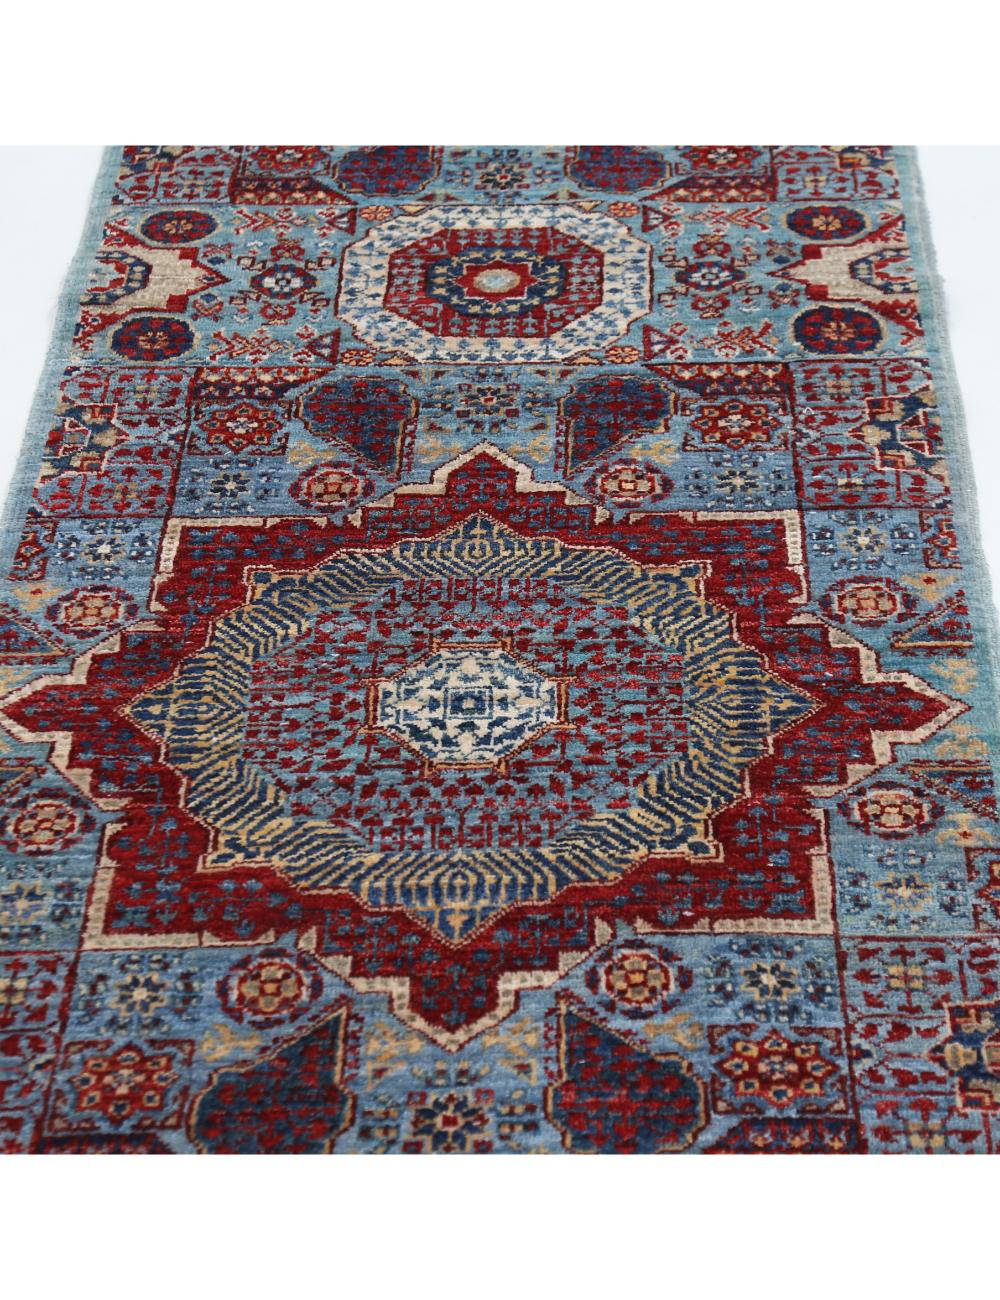 Mamluk 2' 7" X 9' 9" Hand-Knotted Wool Rug 2' 7" X 9' 9" (79 X 297) / Blue / Red